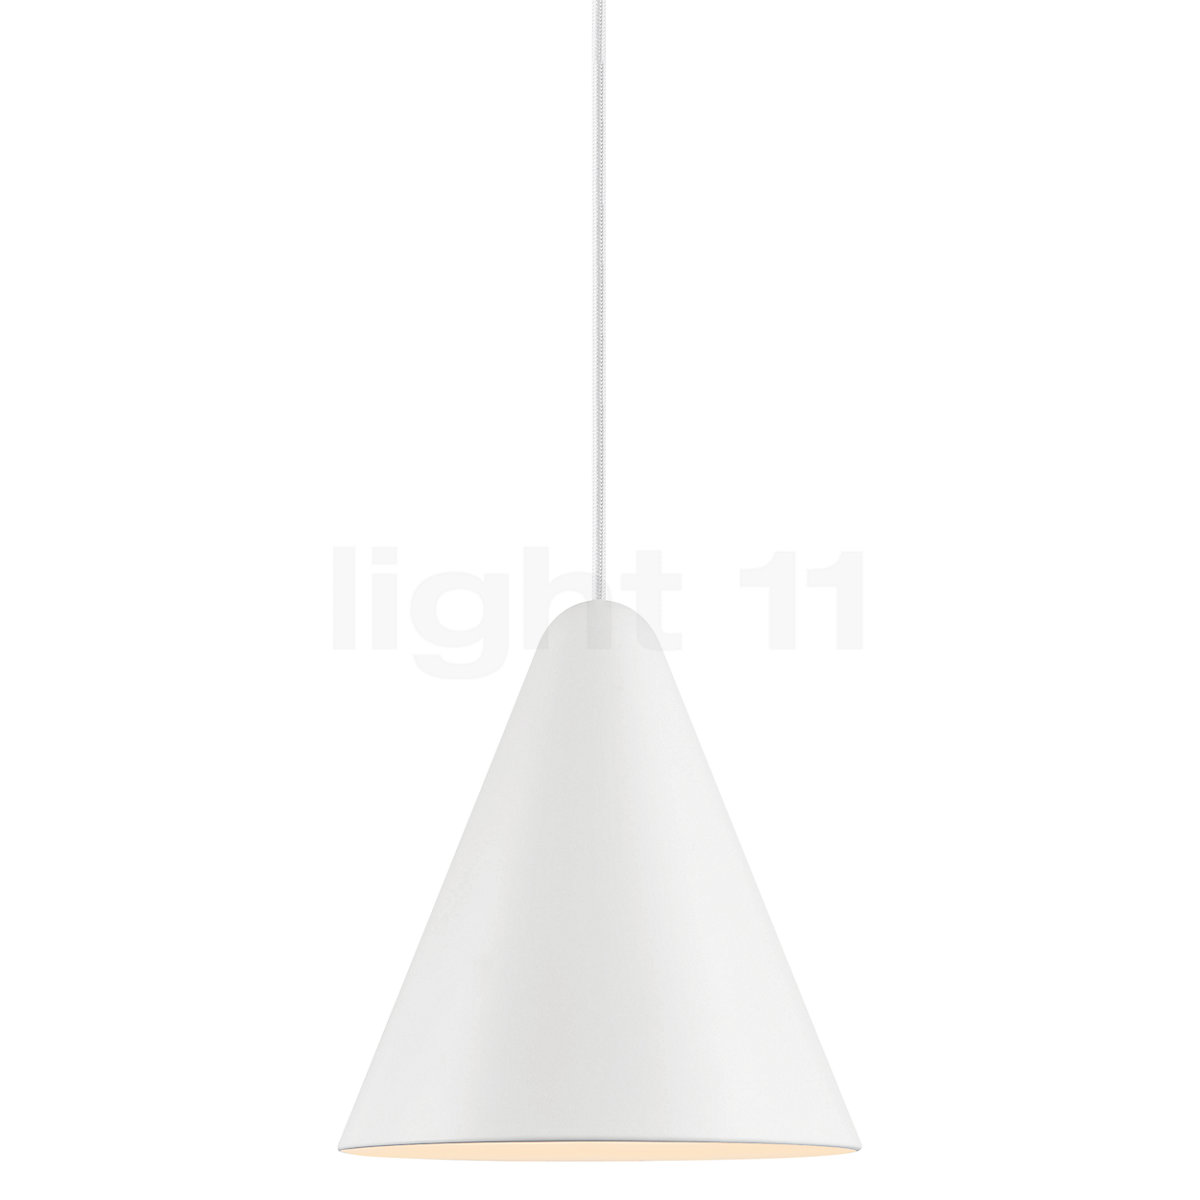 Buy Design for the People Nono Pendant Light at